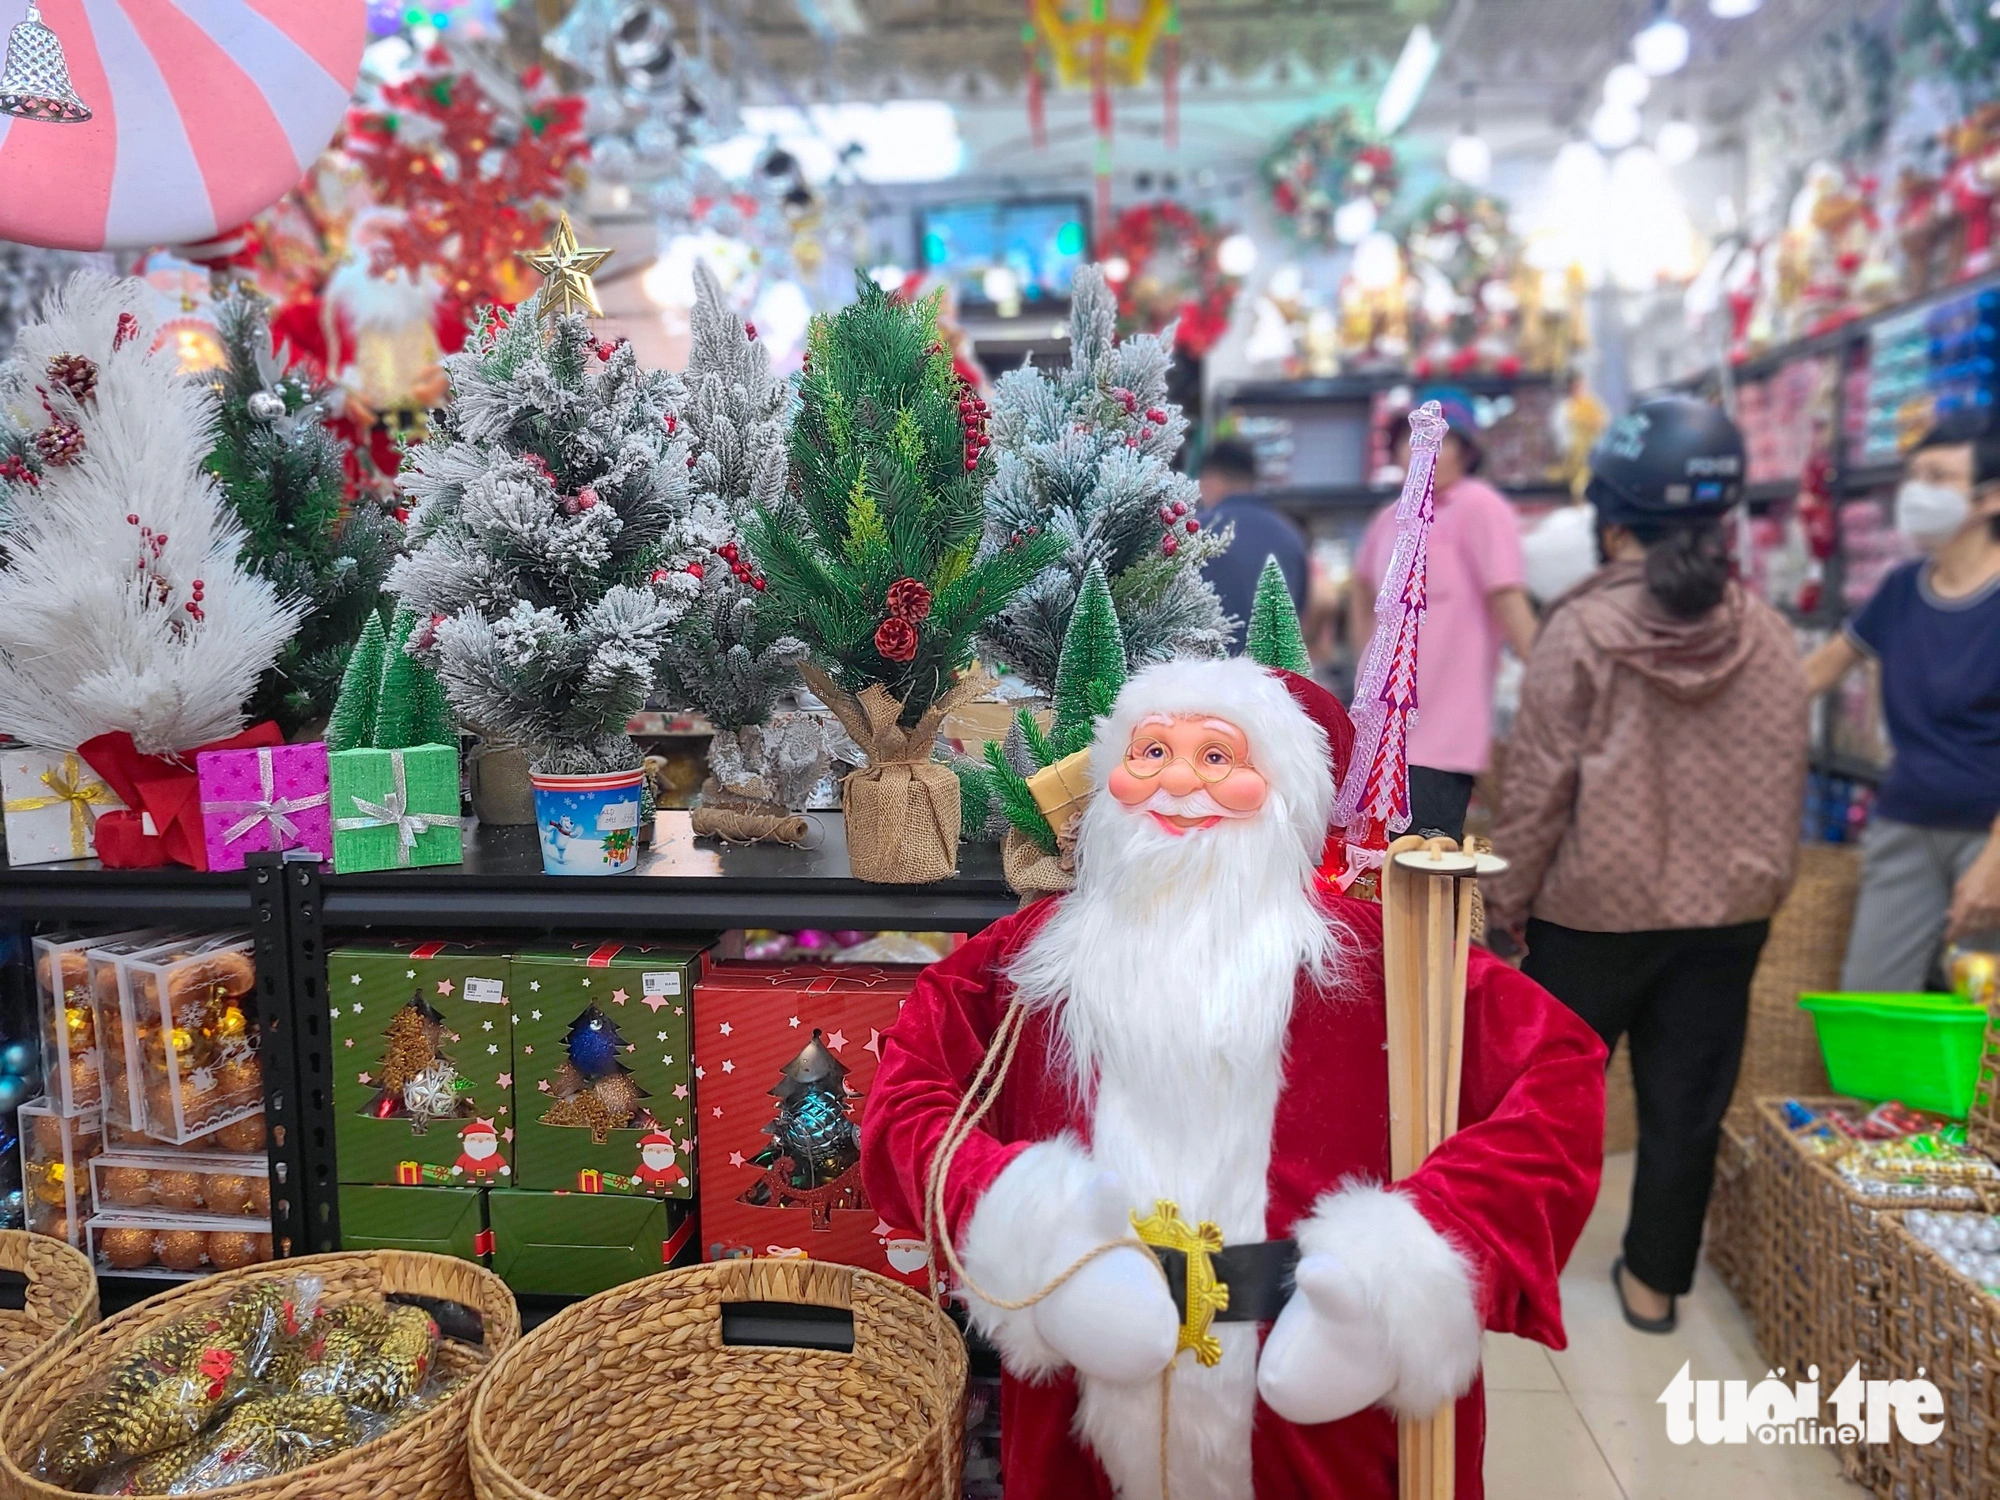 A Santa Claus figurine is displayed at a shop in Ho Chi Minh City. Photo: Nhat Xuan / Tuoi Tre